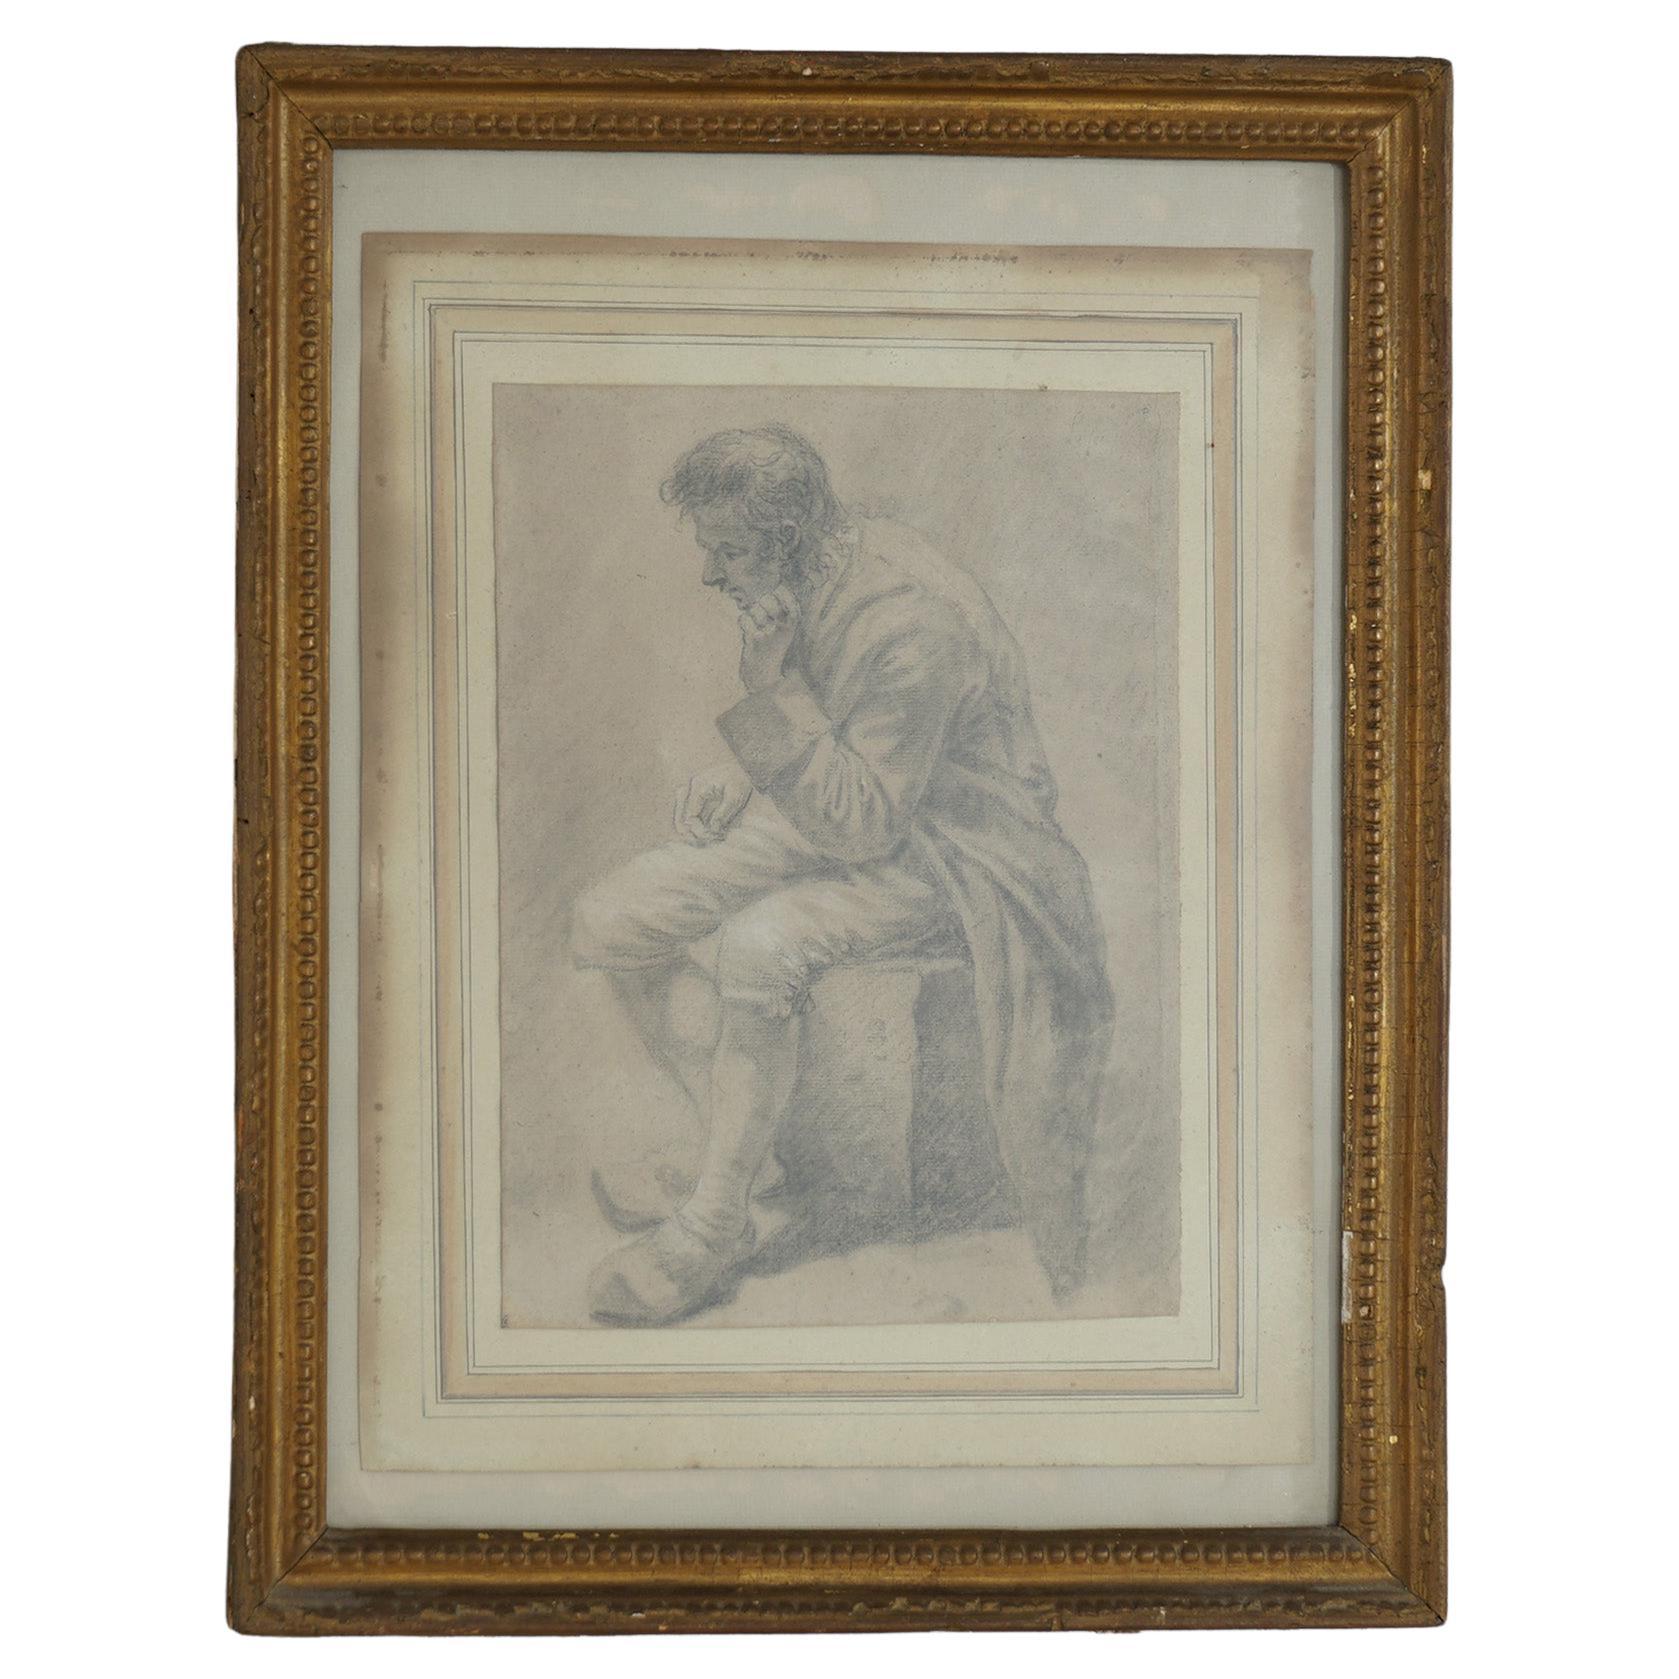 Antique Pencil Portrait Drawing of a Seated Man, Framed, 19th C